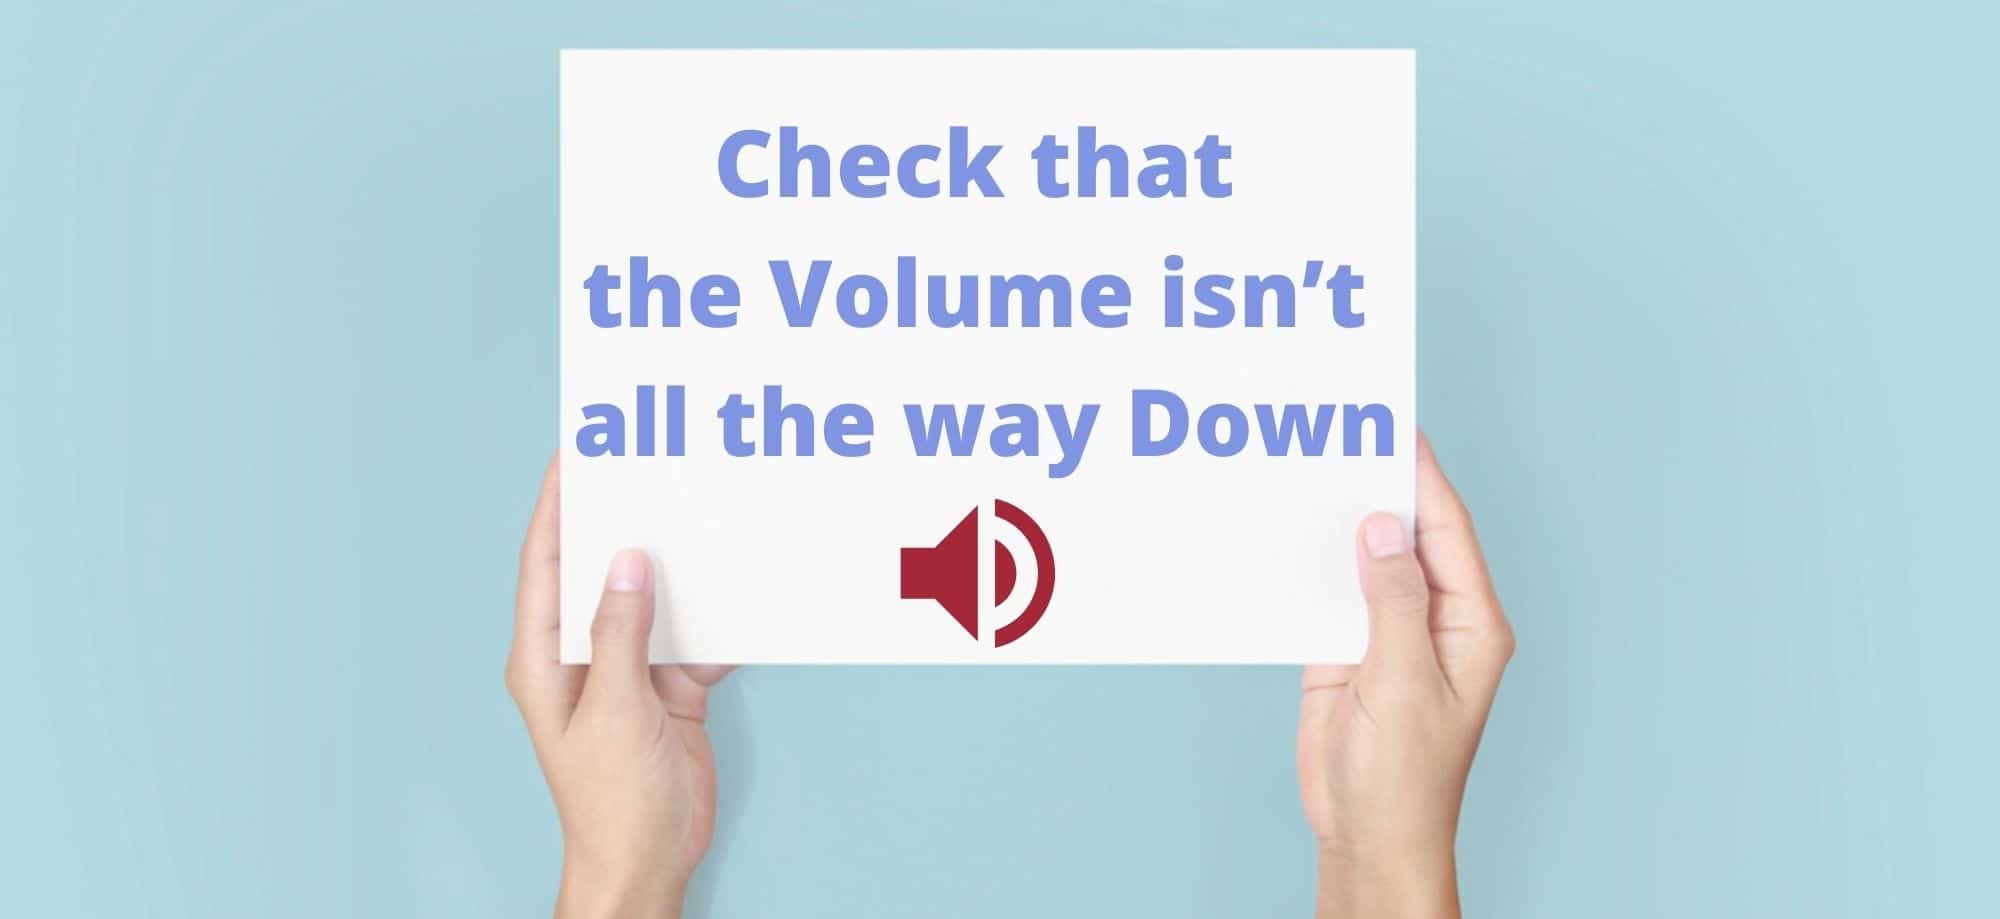 Check that the Volume isn’t all the way Down